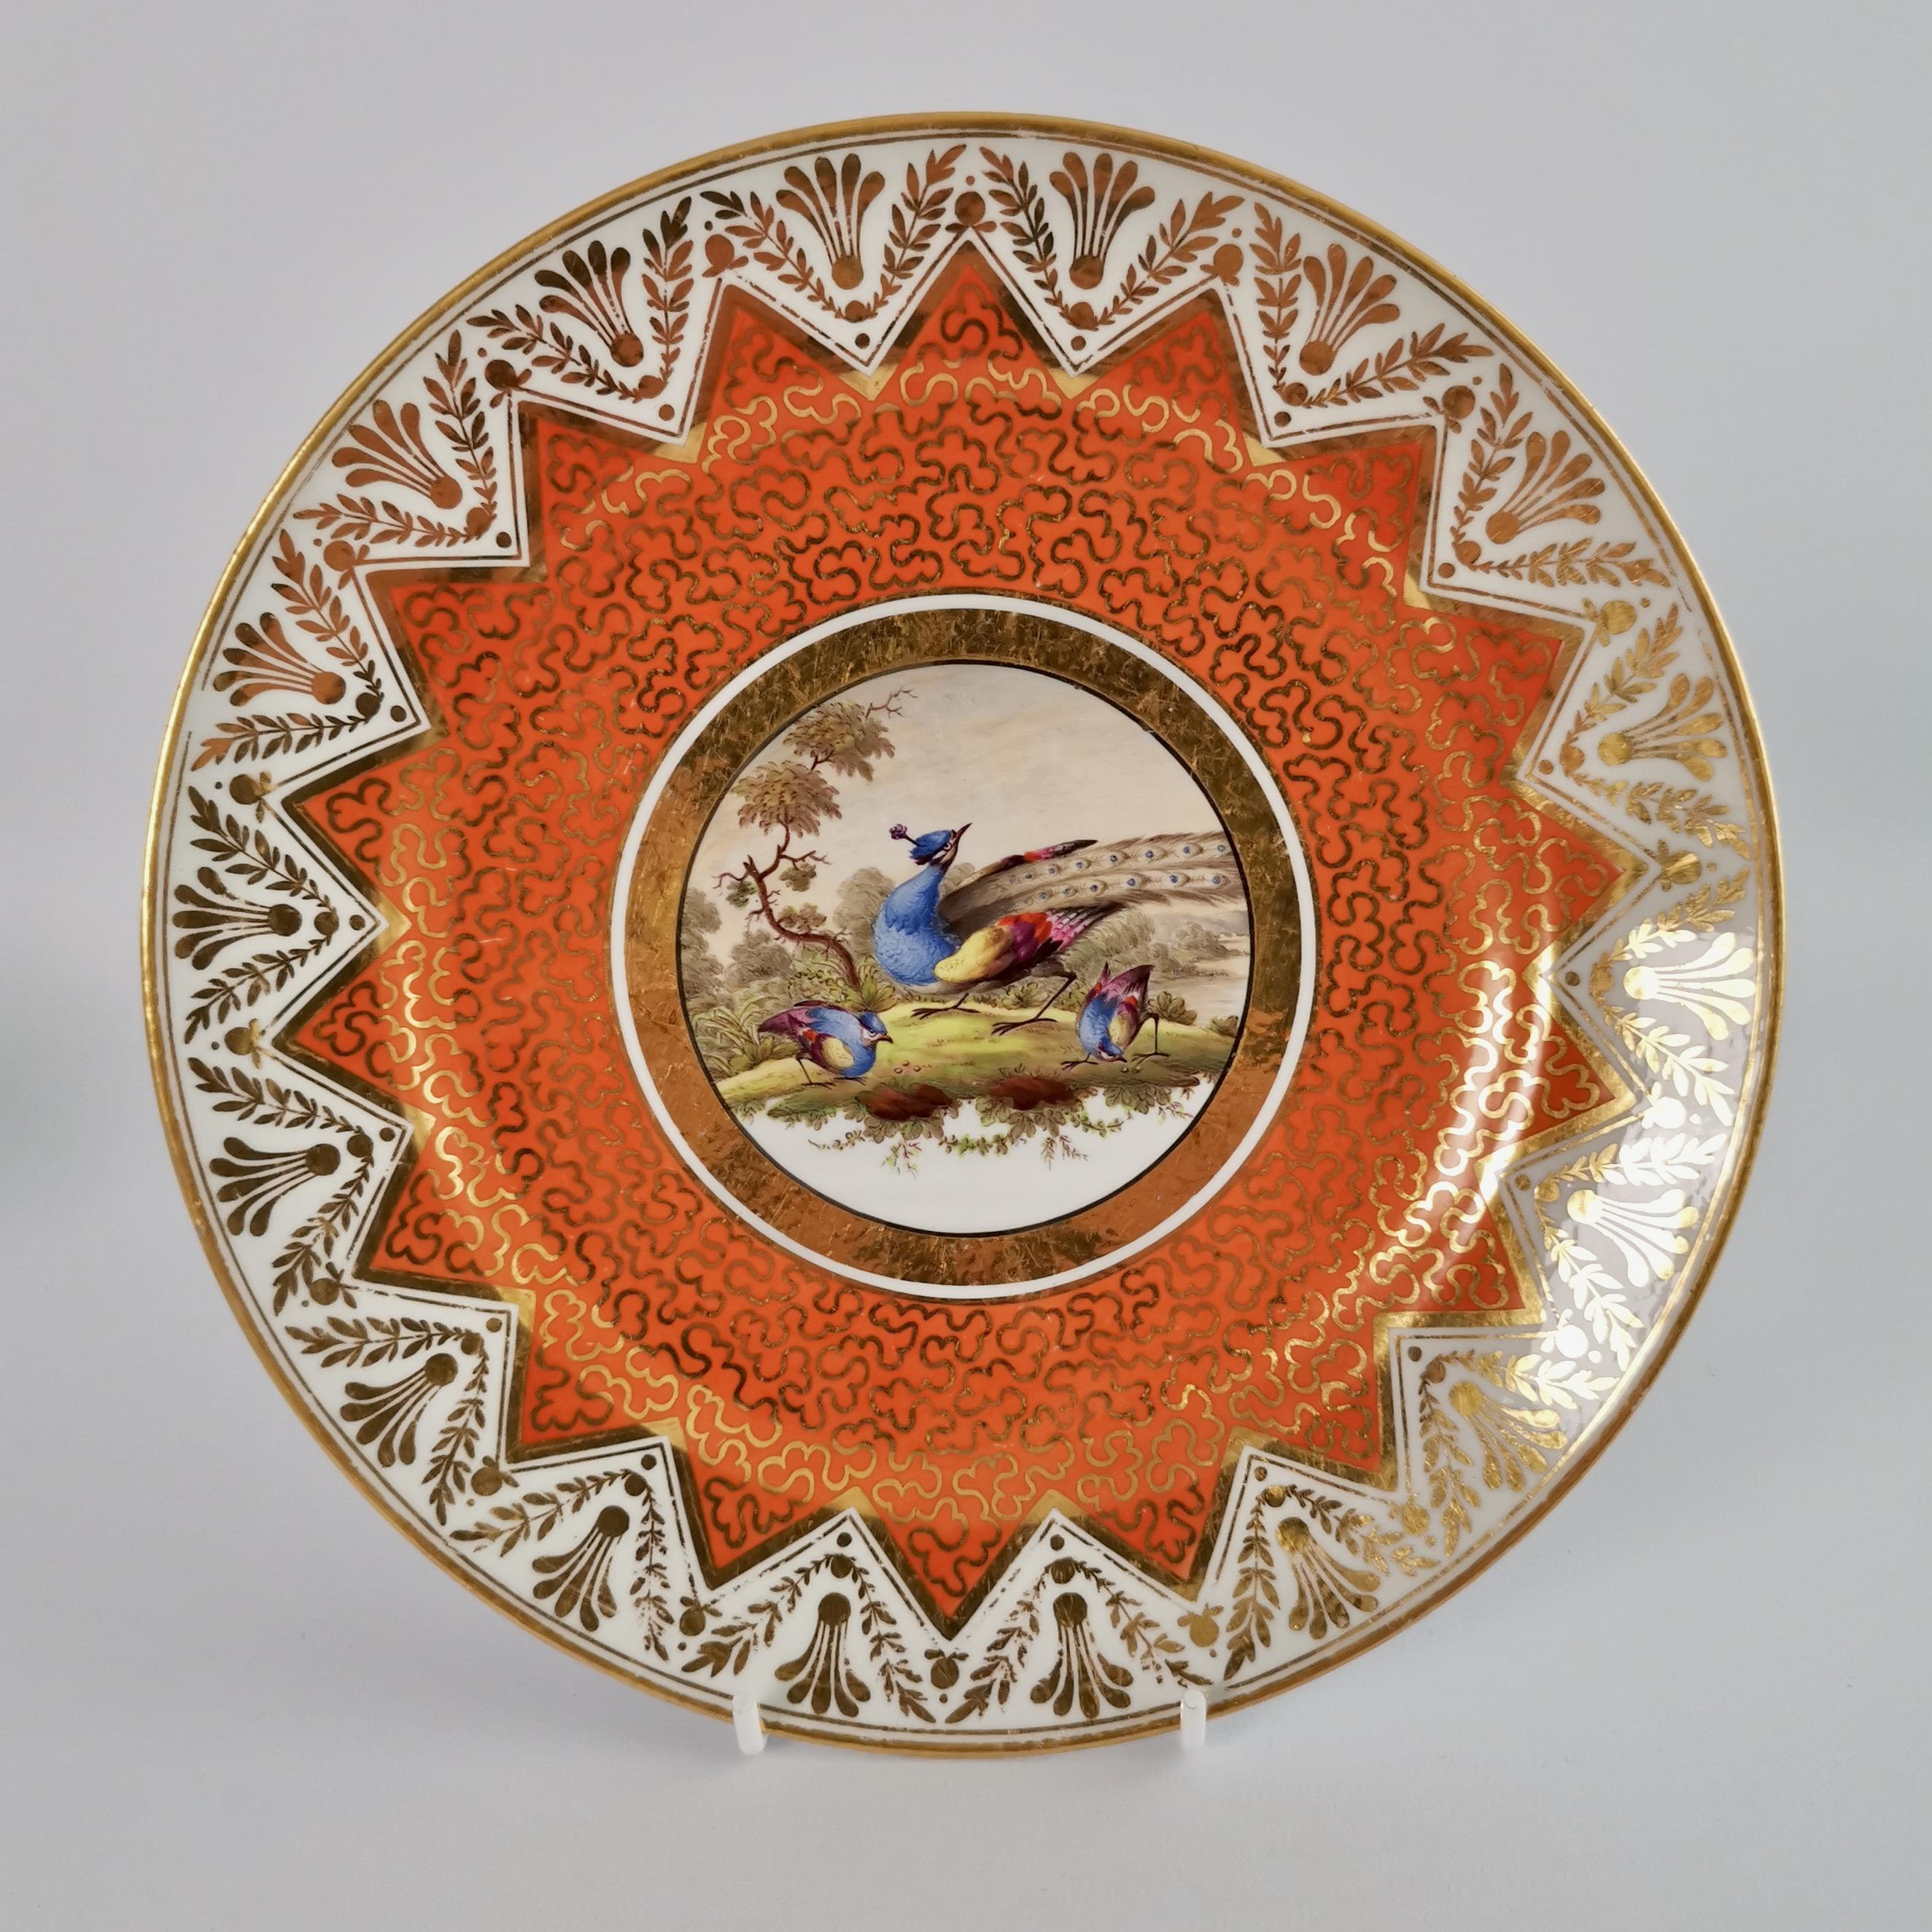 Chamberlains Worcester Set of Plates, Orange, Paintings by H. Chamberlain, 1815 1